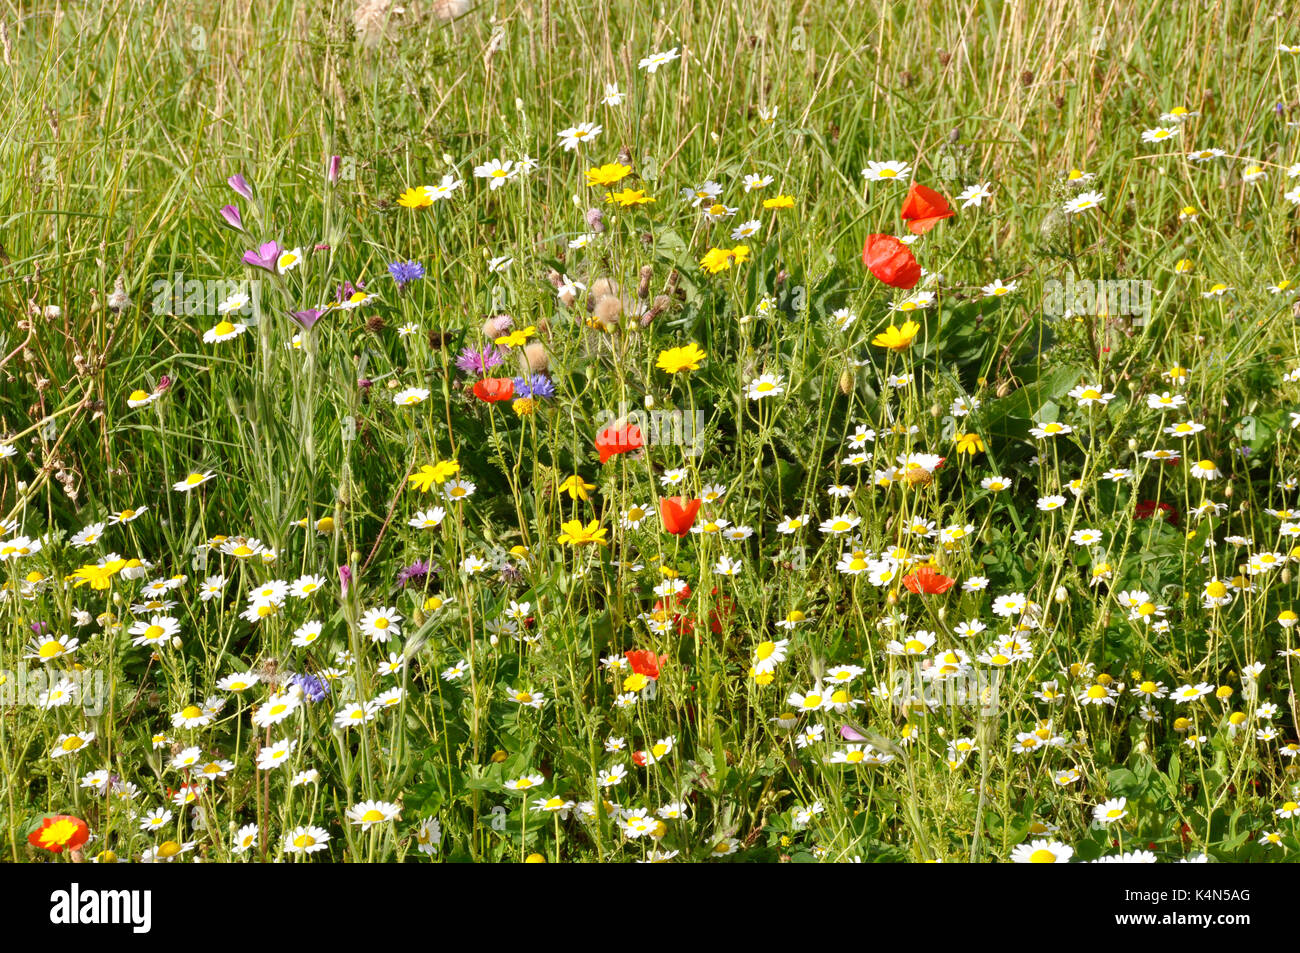 Summertime - field of wild flowers -poppies - cork cockle - scabius - grasses - sunlight - brightness Stock Photo